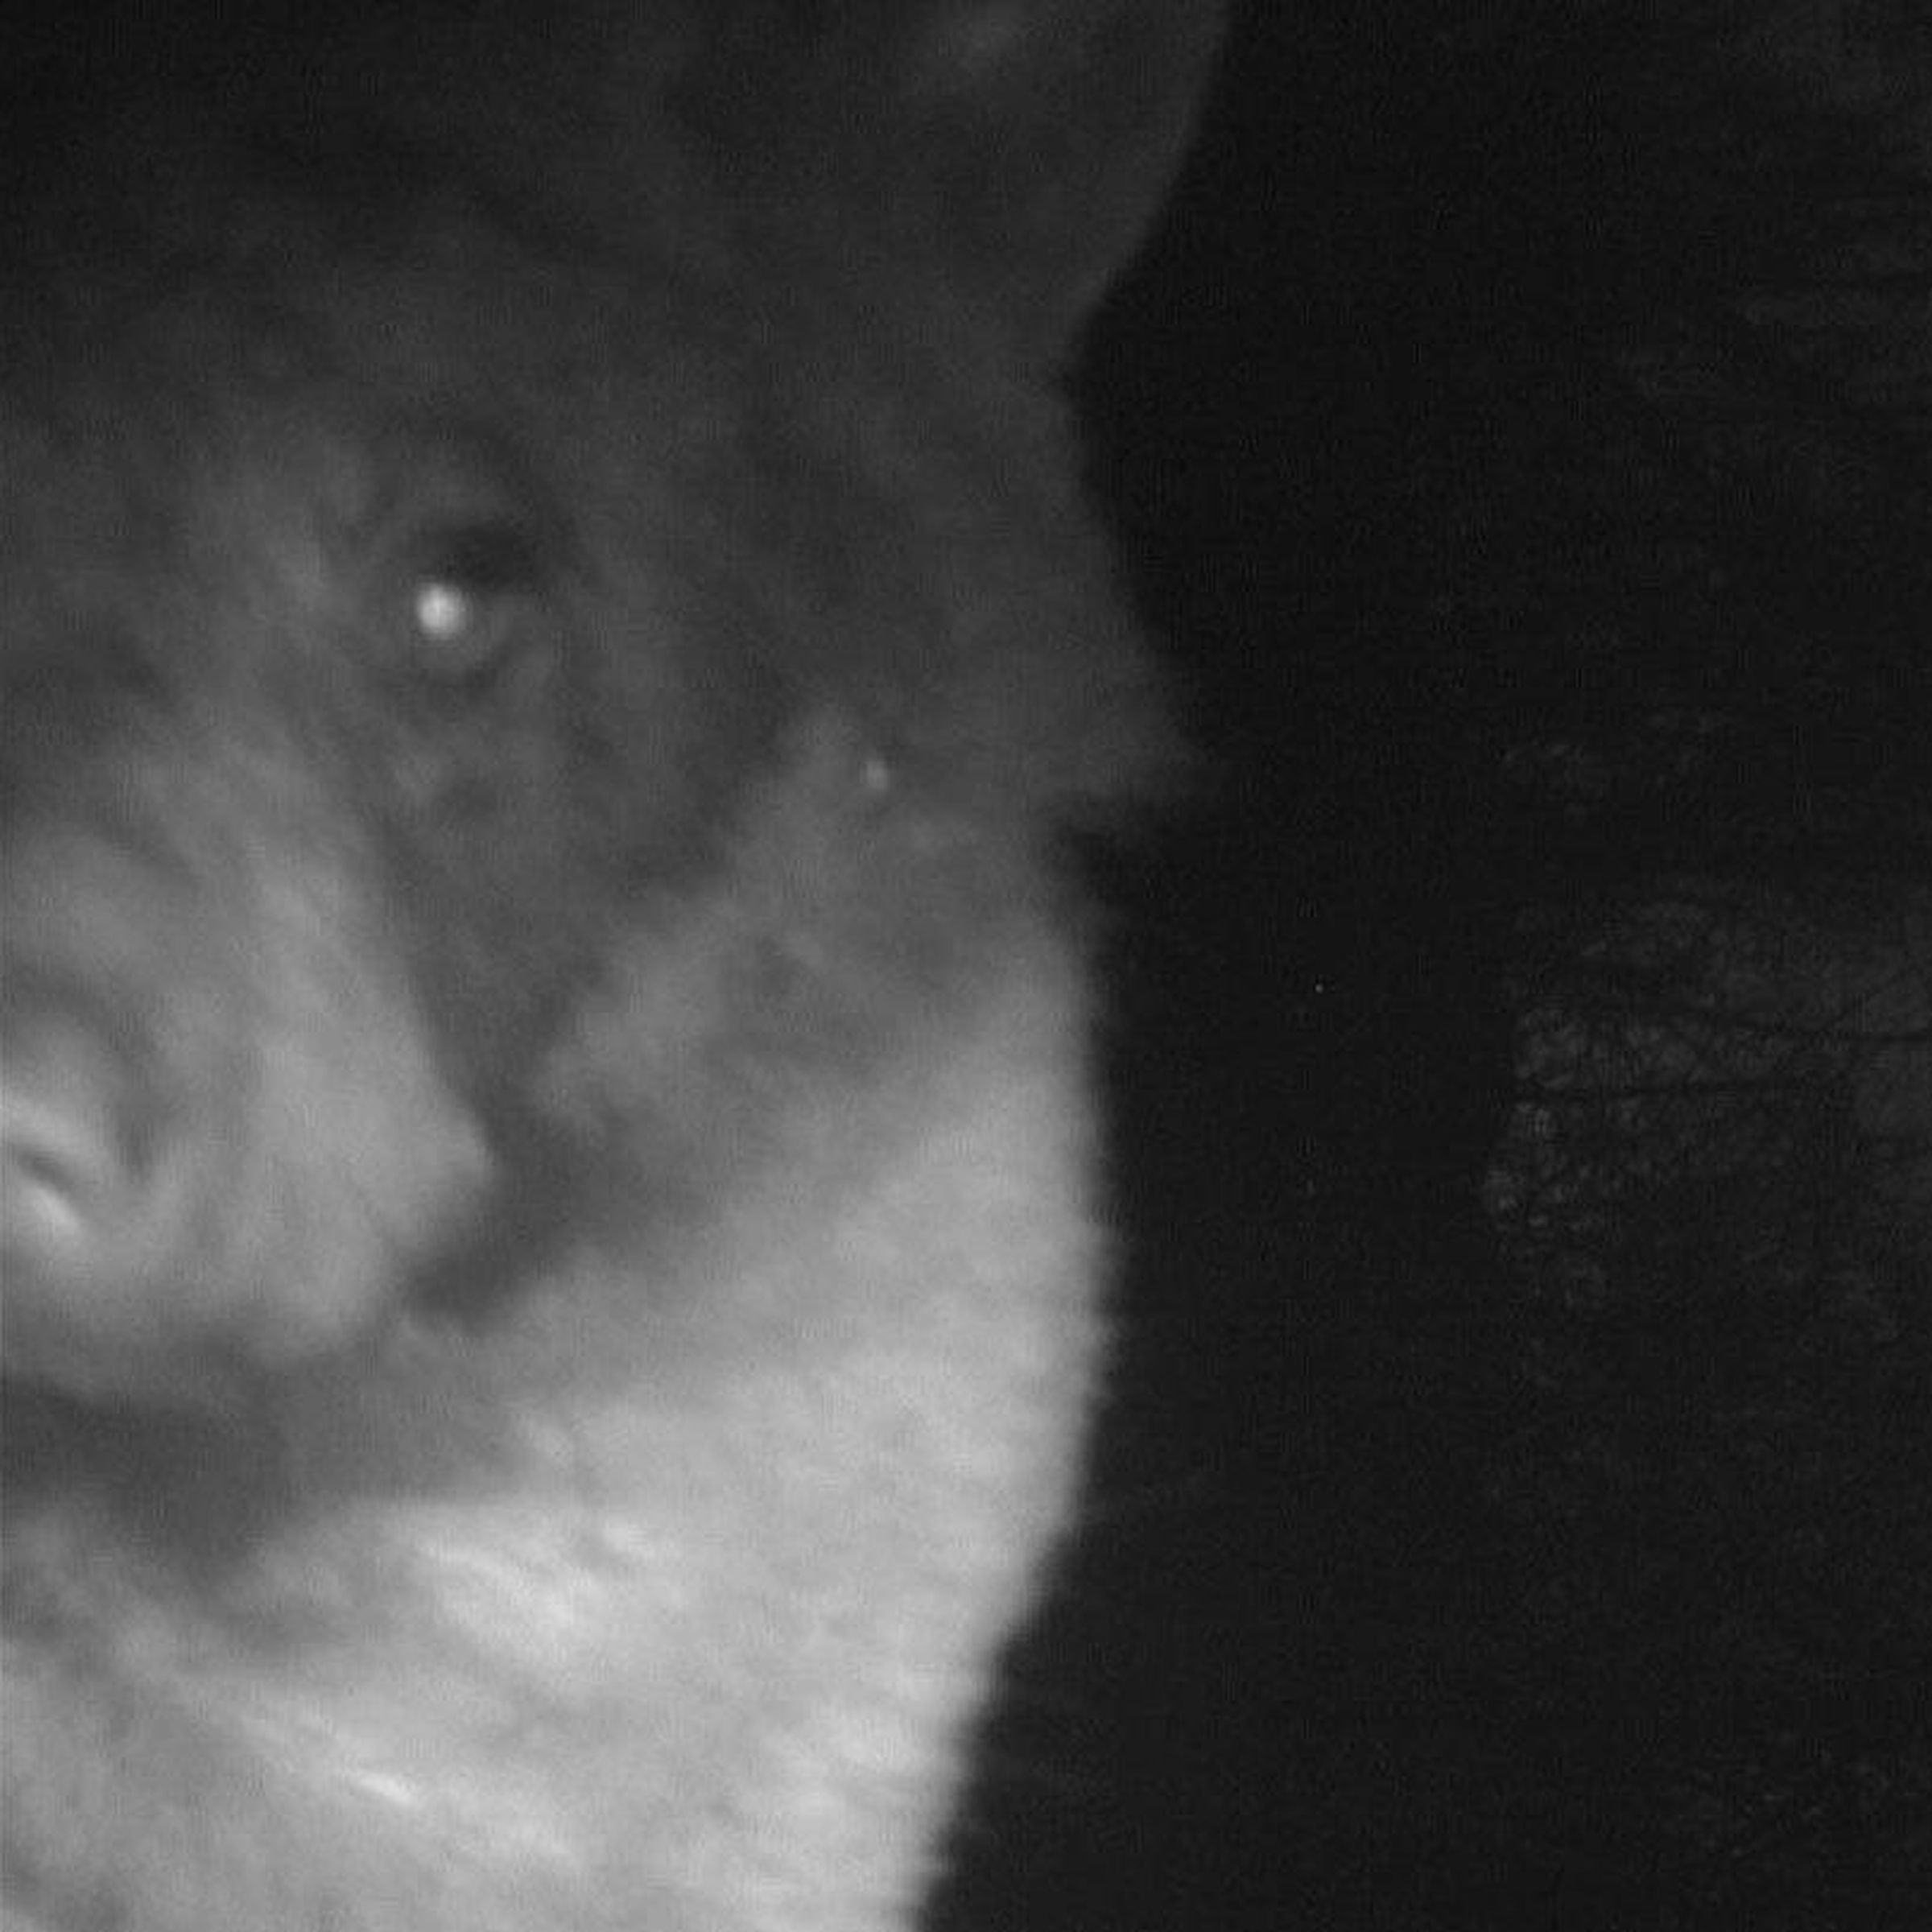 Half a face a bear appears in a black and white image captured at night